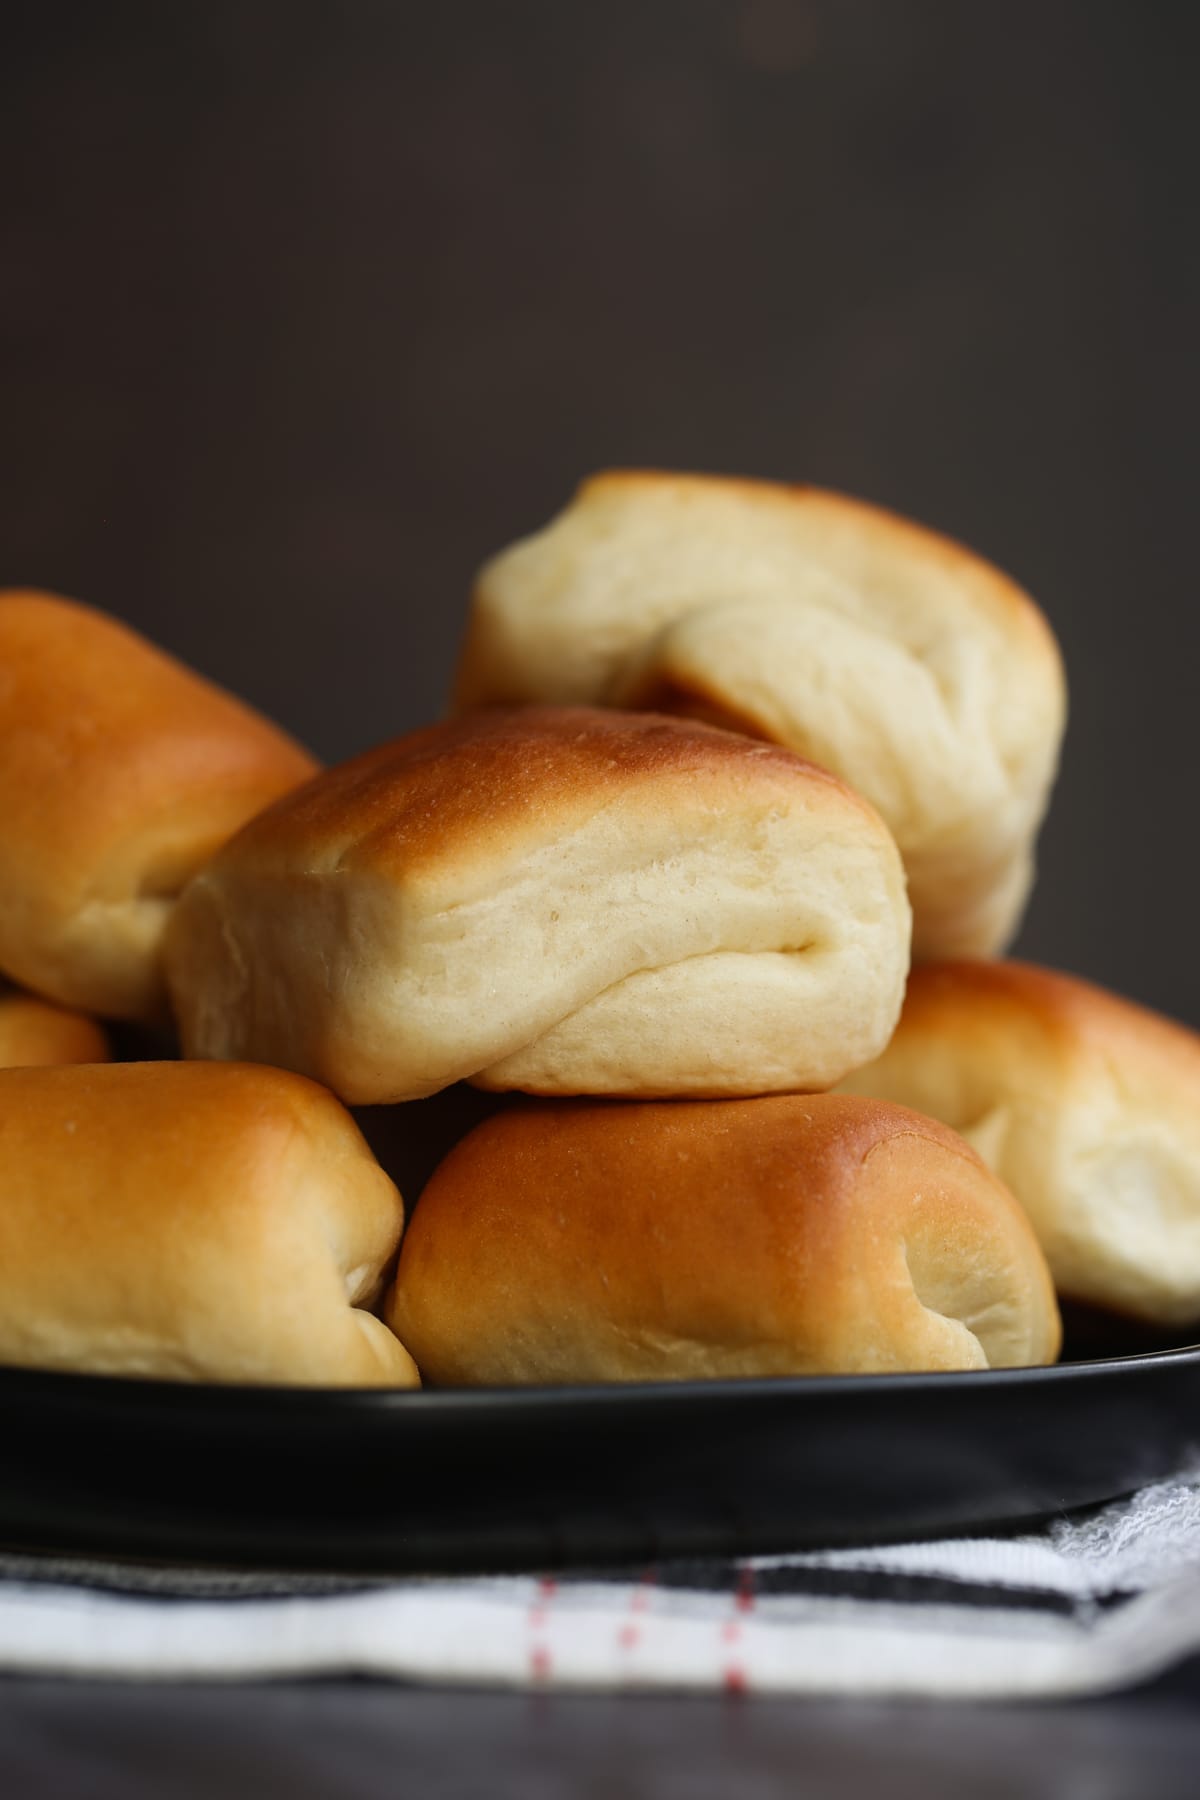 Side view of golden baked Parker House rolls piled on a black plate.